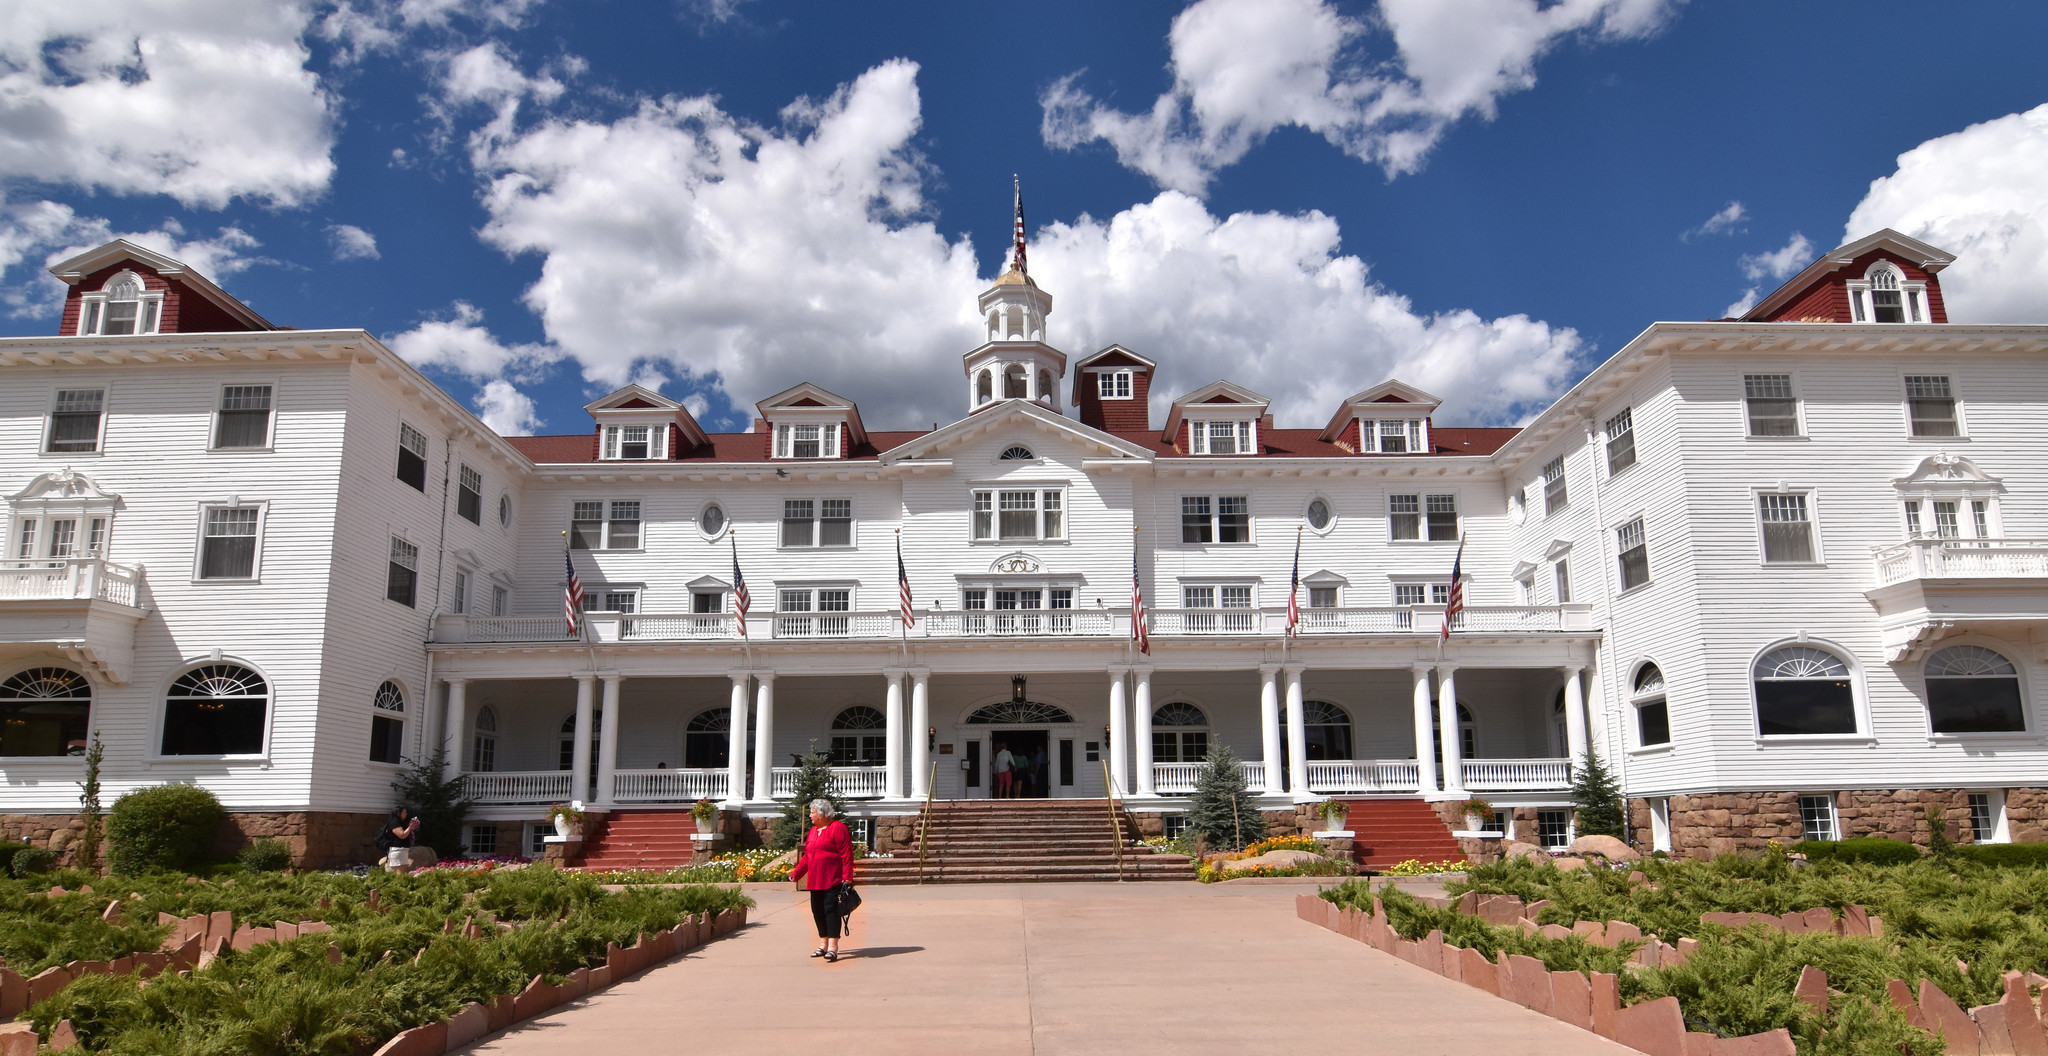 National park tips: See the spooky Stanley Hotel that inspired Stephen King's 'The Shining' - Los Angeles Times